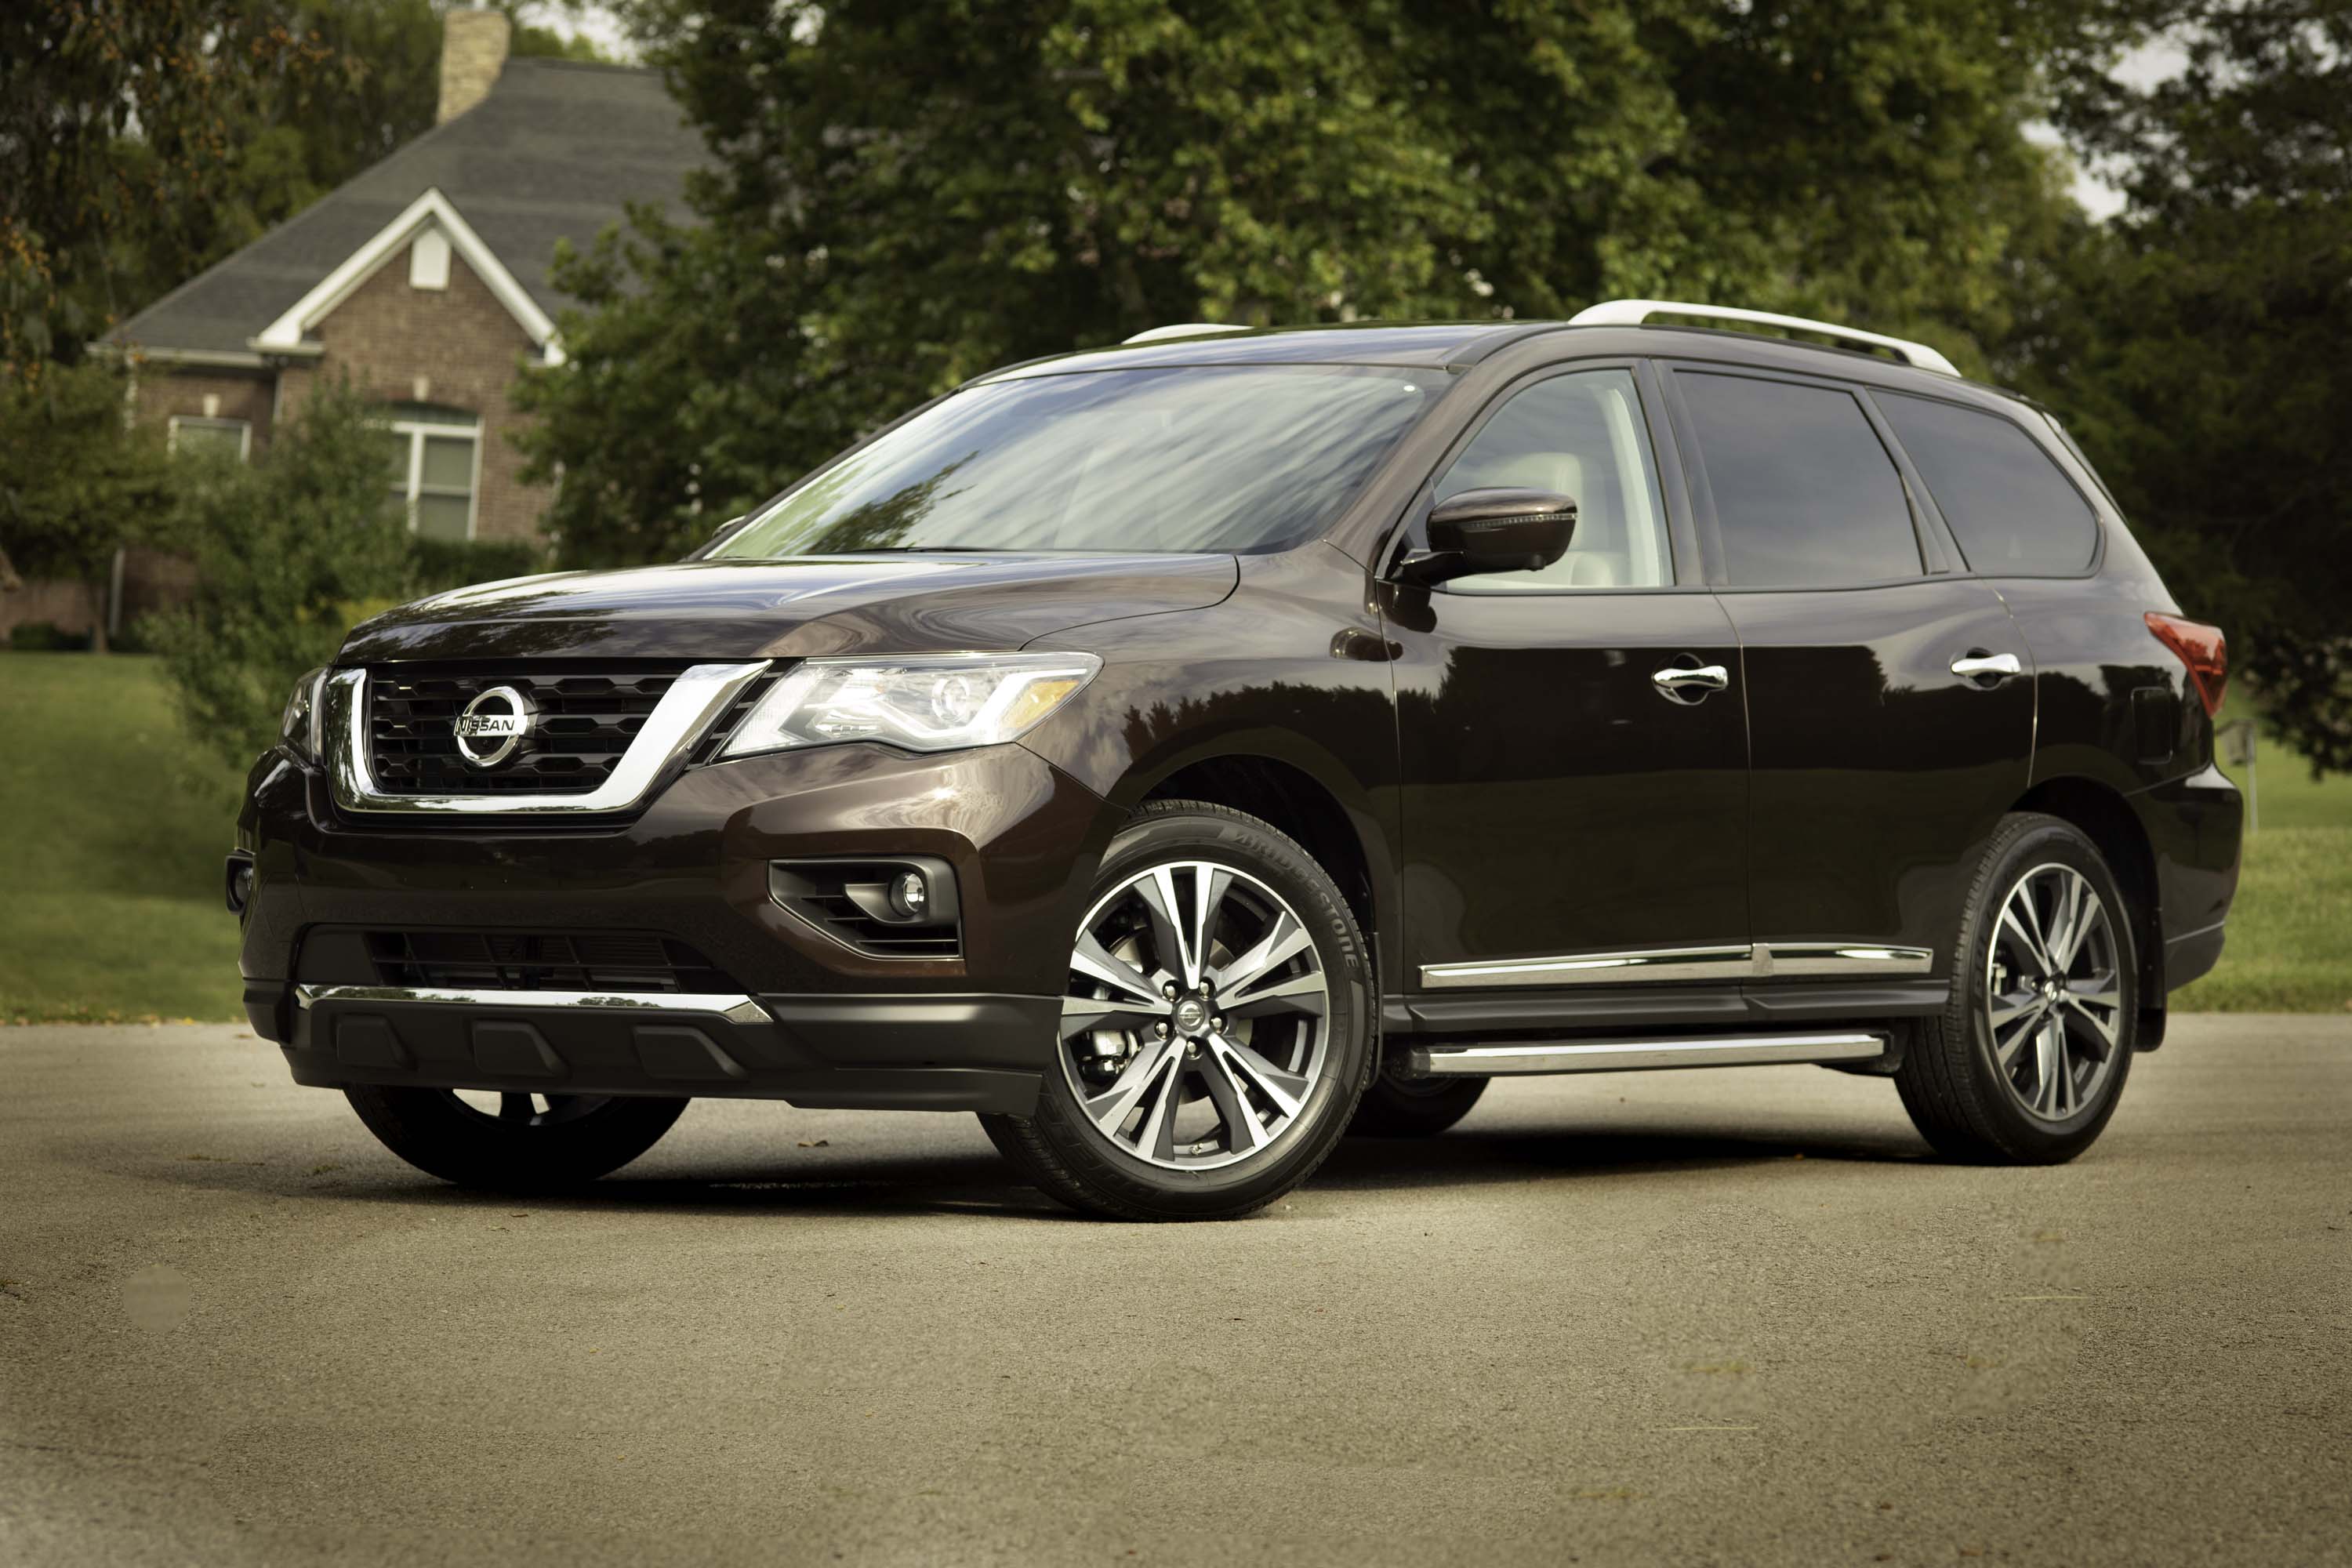 2019 Nissan Pathfinder Review Ratings